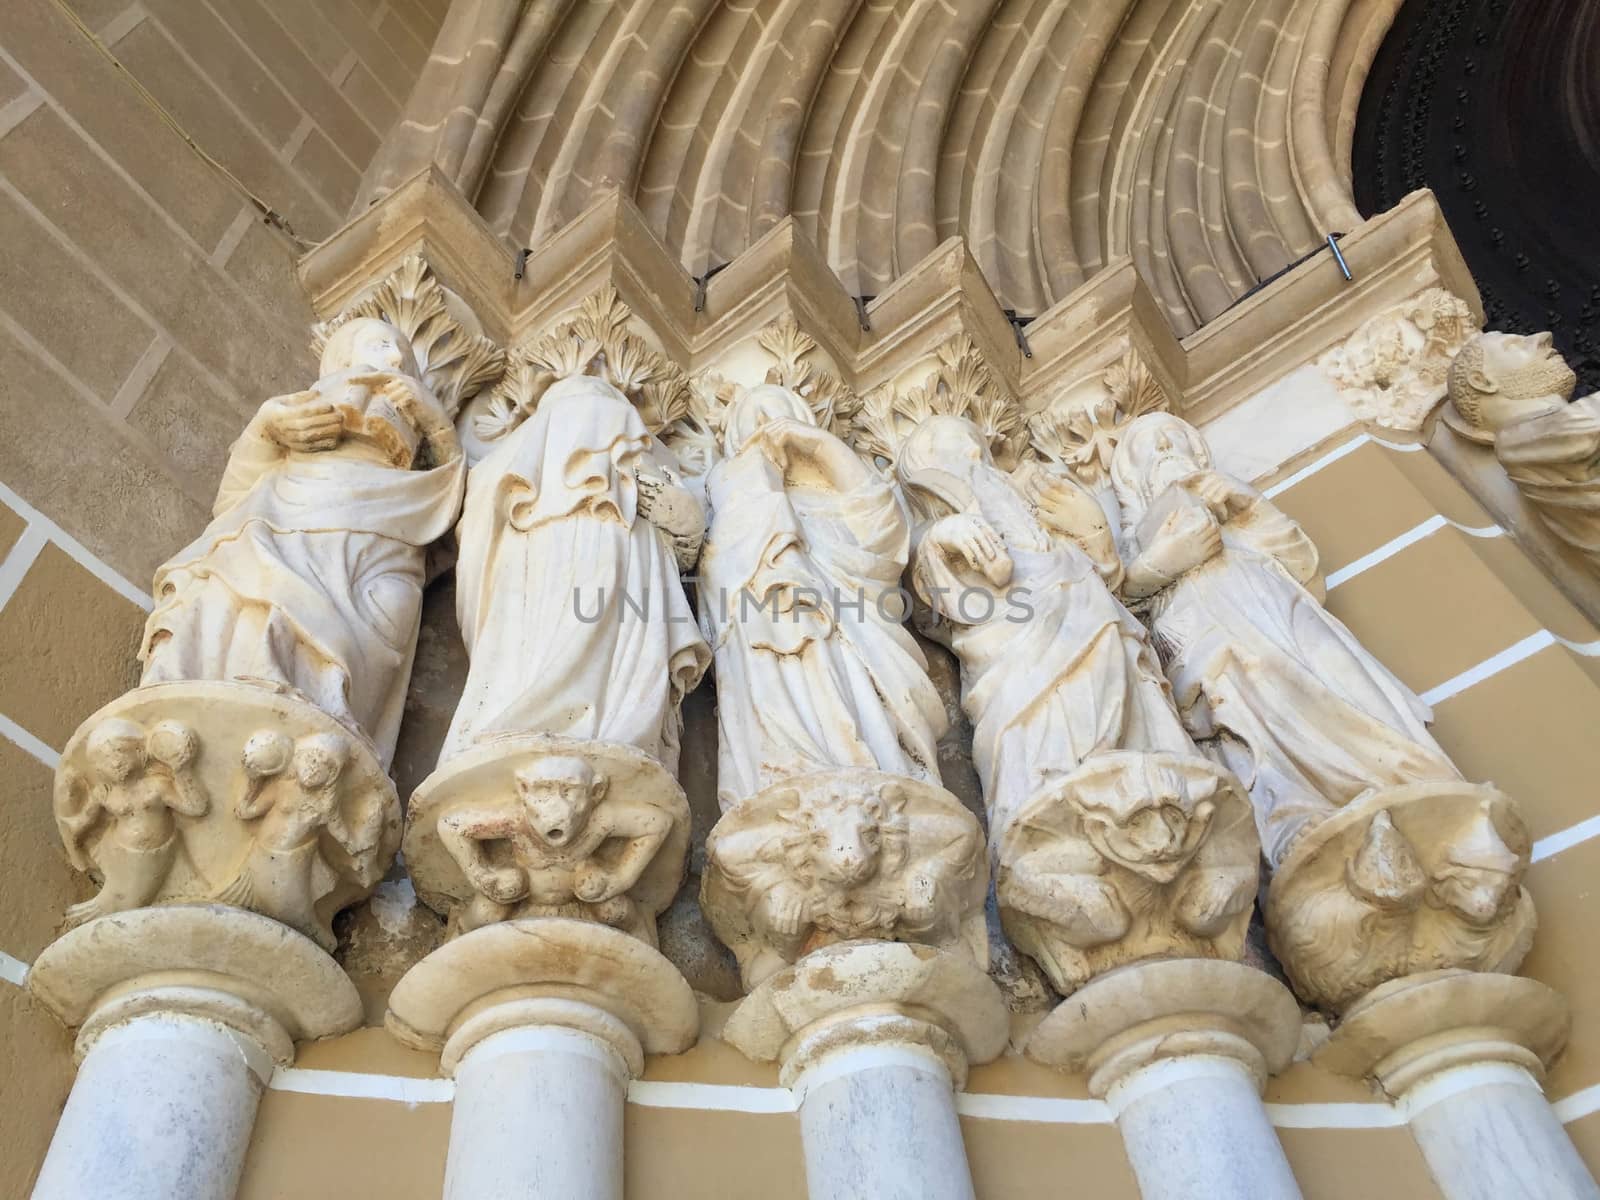 Fourteenth century statues of five apostles rise on columns at the entrance to the cathedral in Évora, Portugal. Low-angle image shot in natural light shows lovely color and detalil of figural base.